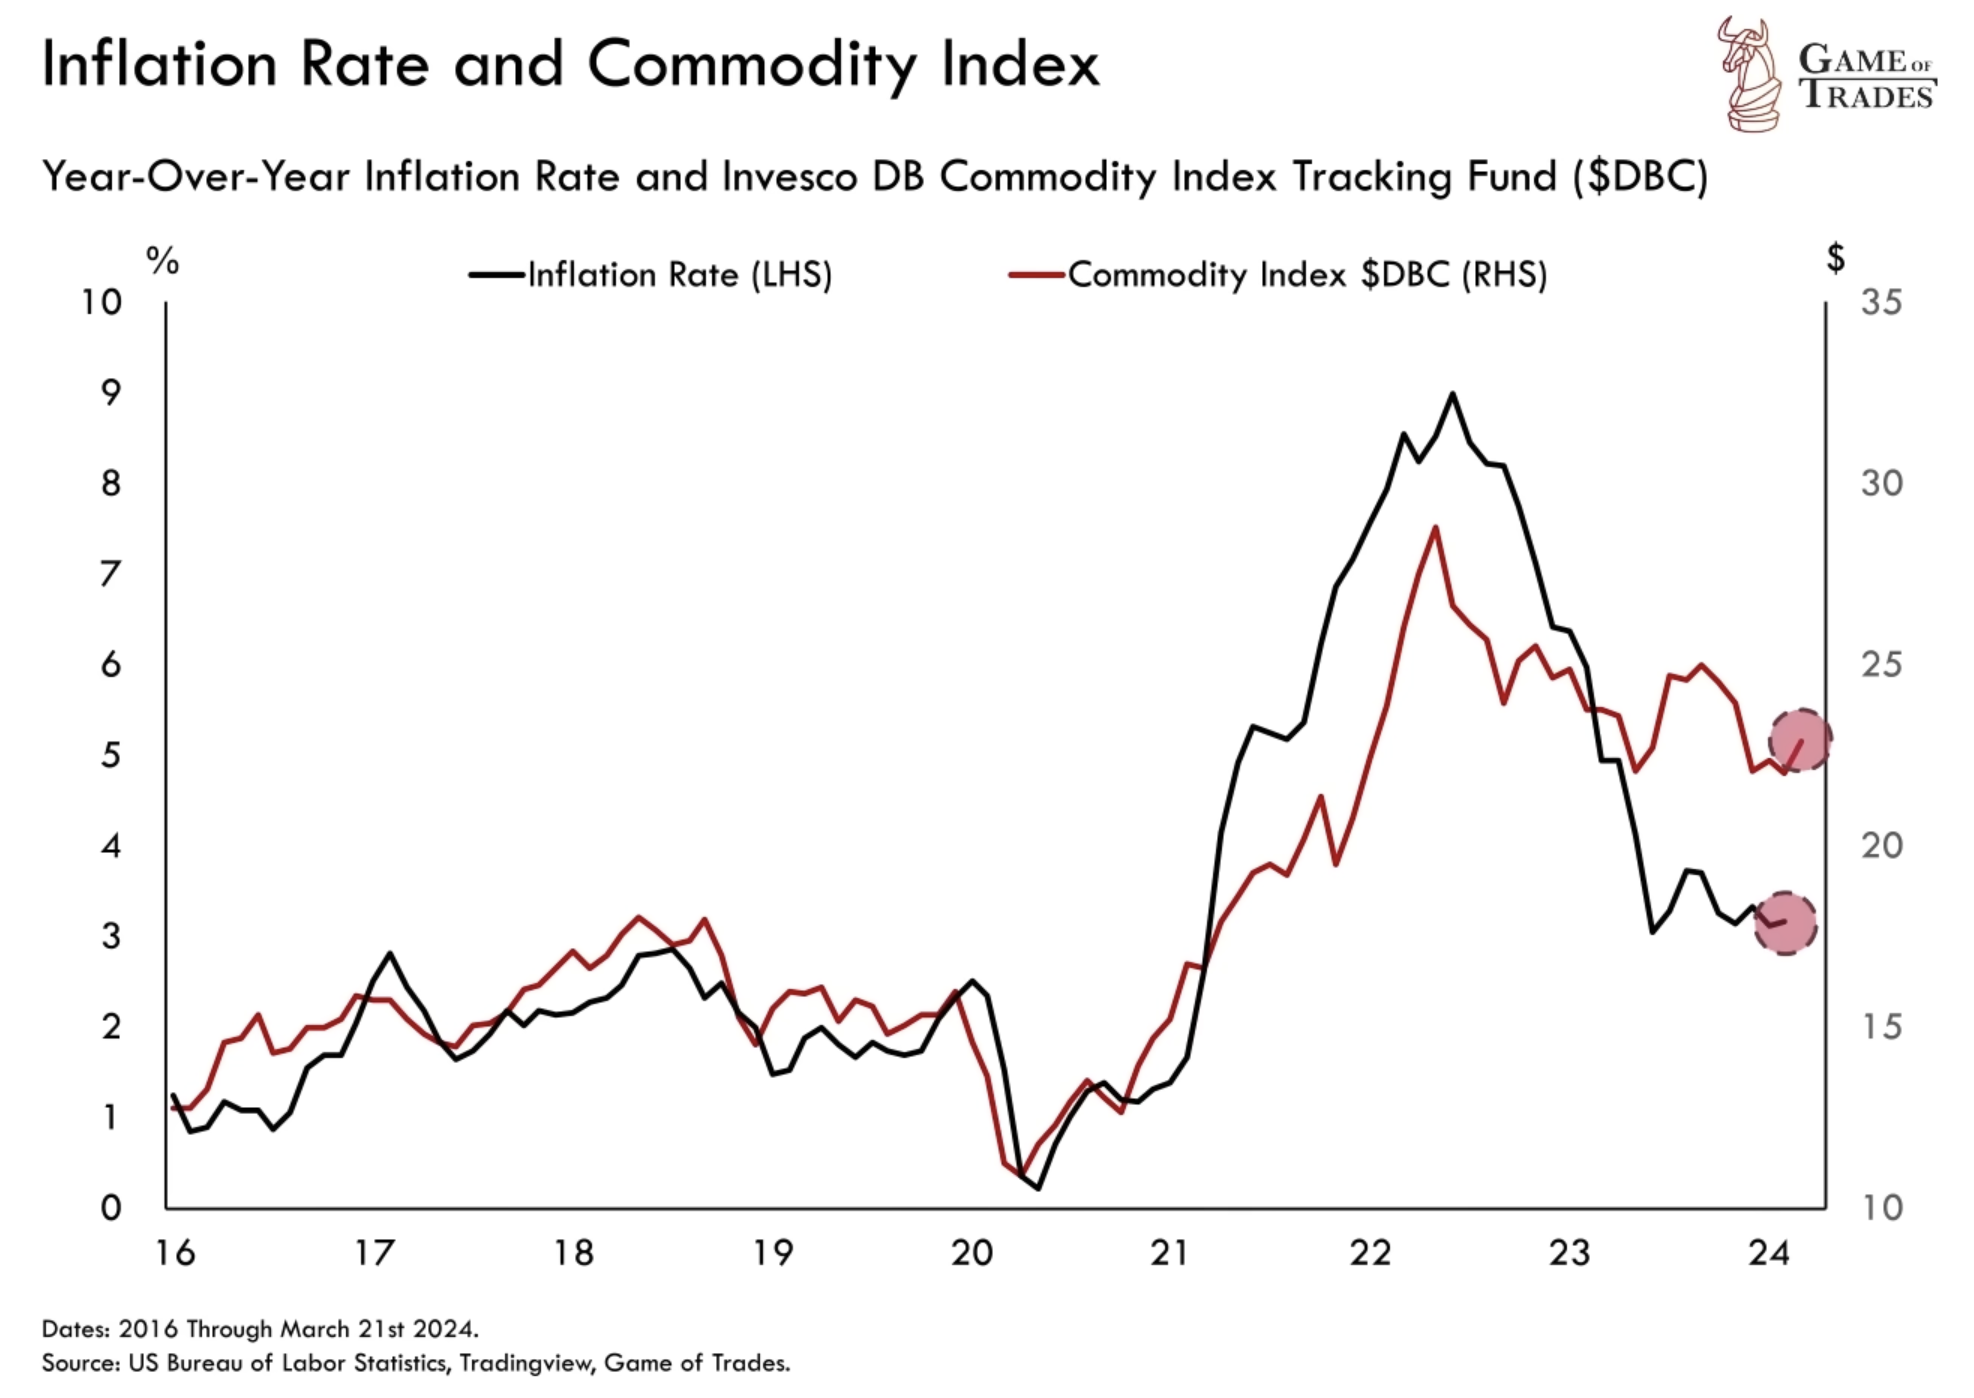 Inflation Rate and Commodity Index